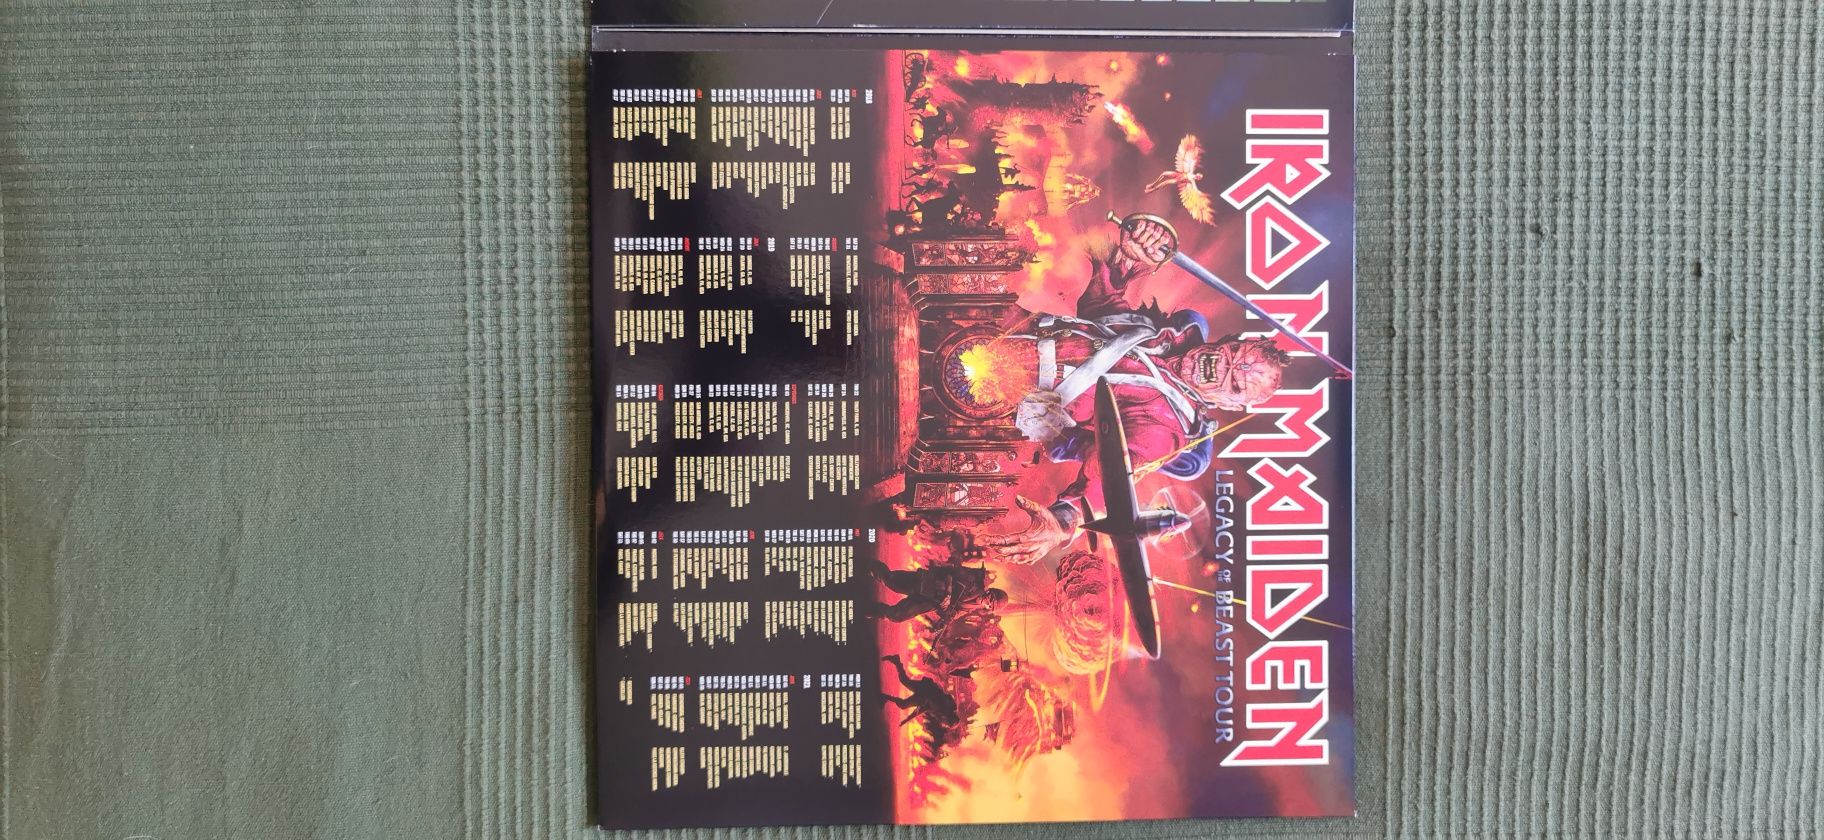 Iron Maiden Legacy of the Beast Live in Mexico